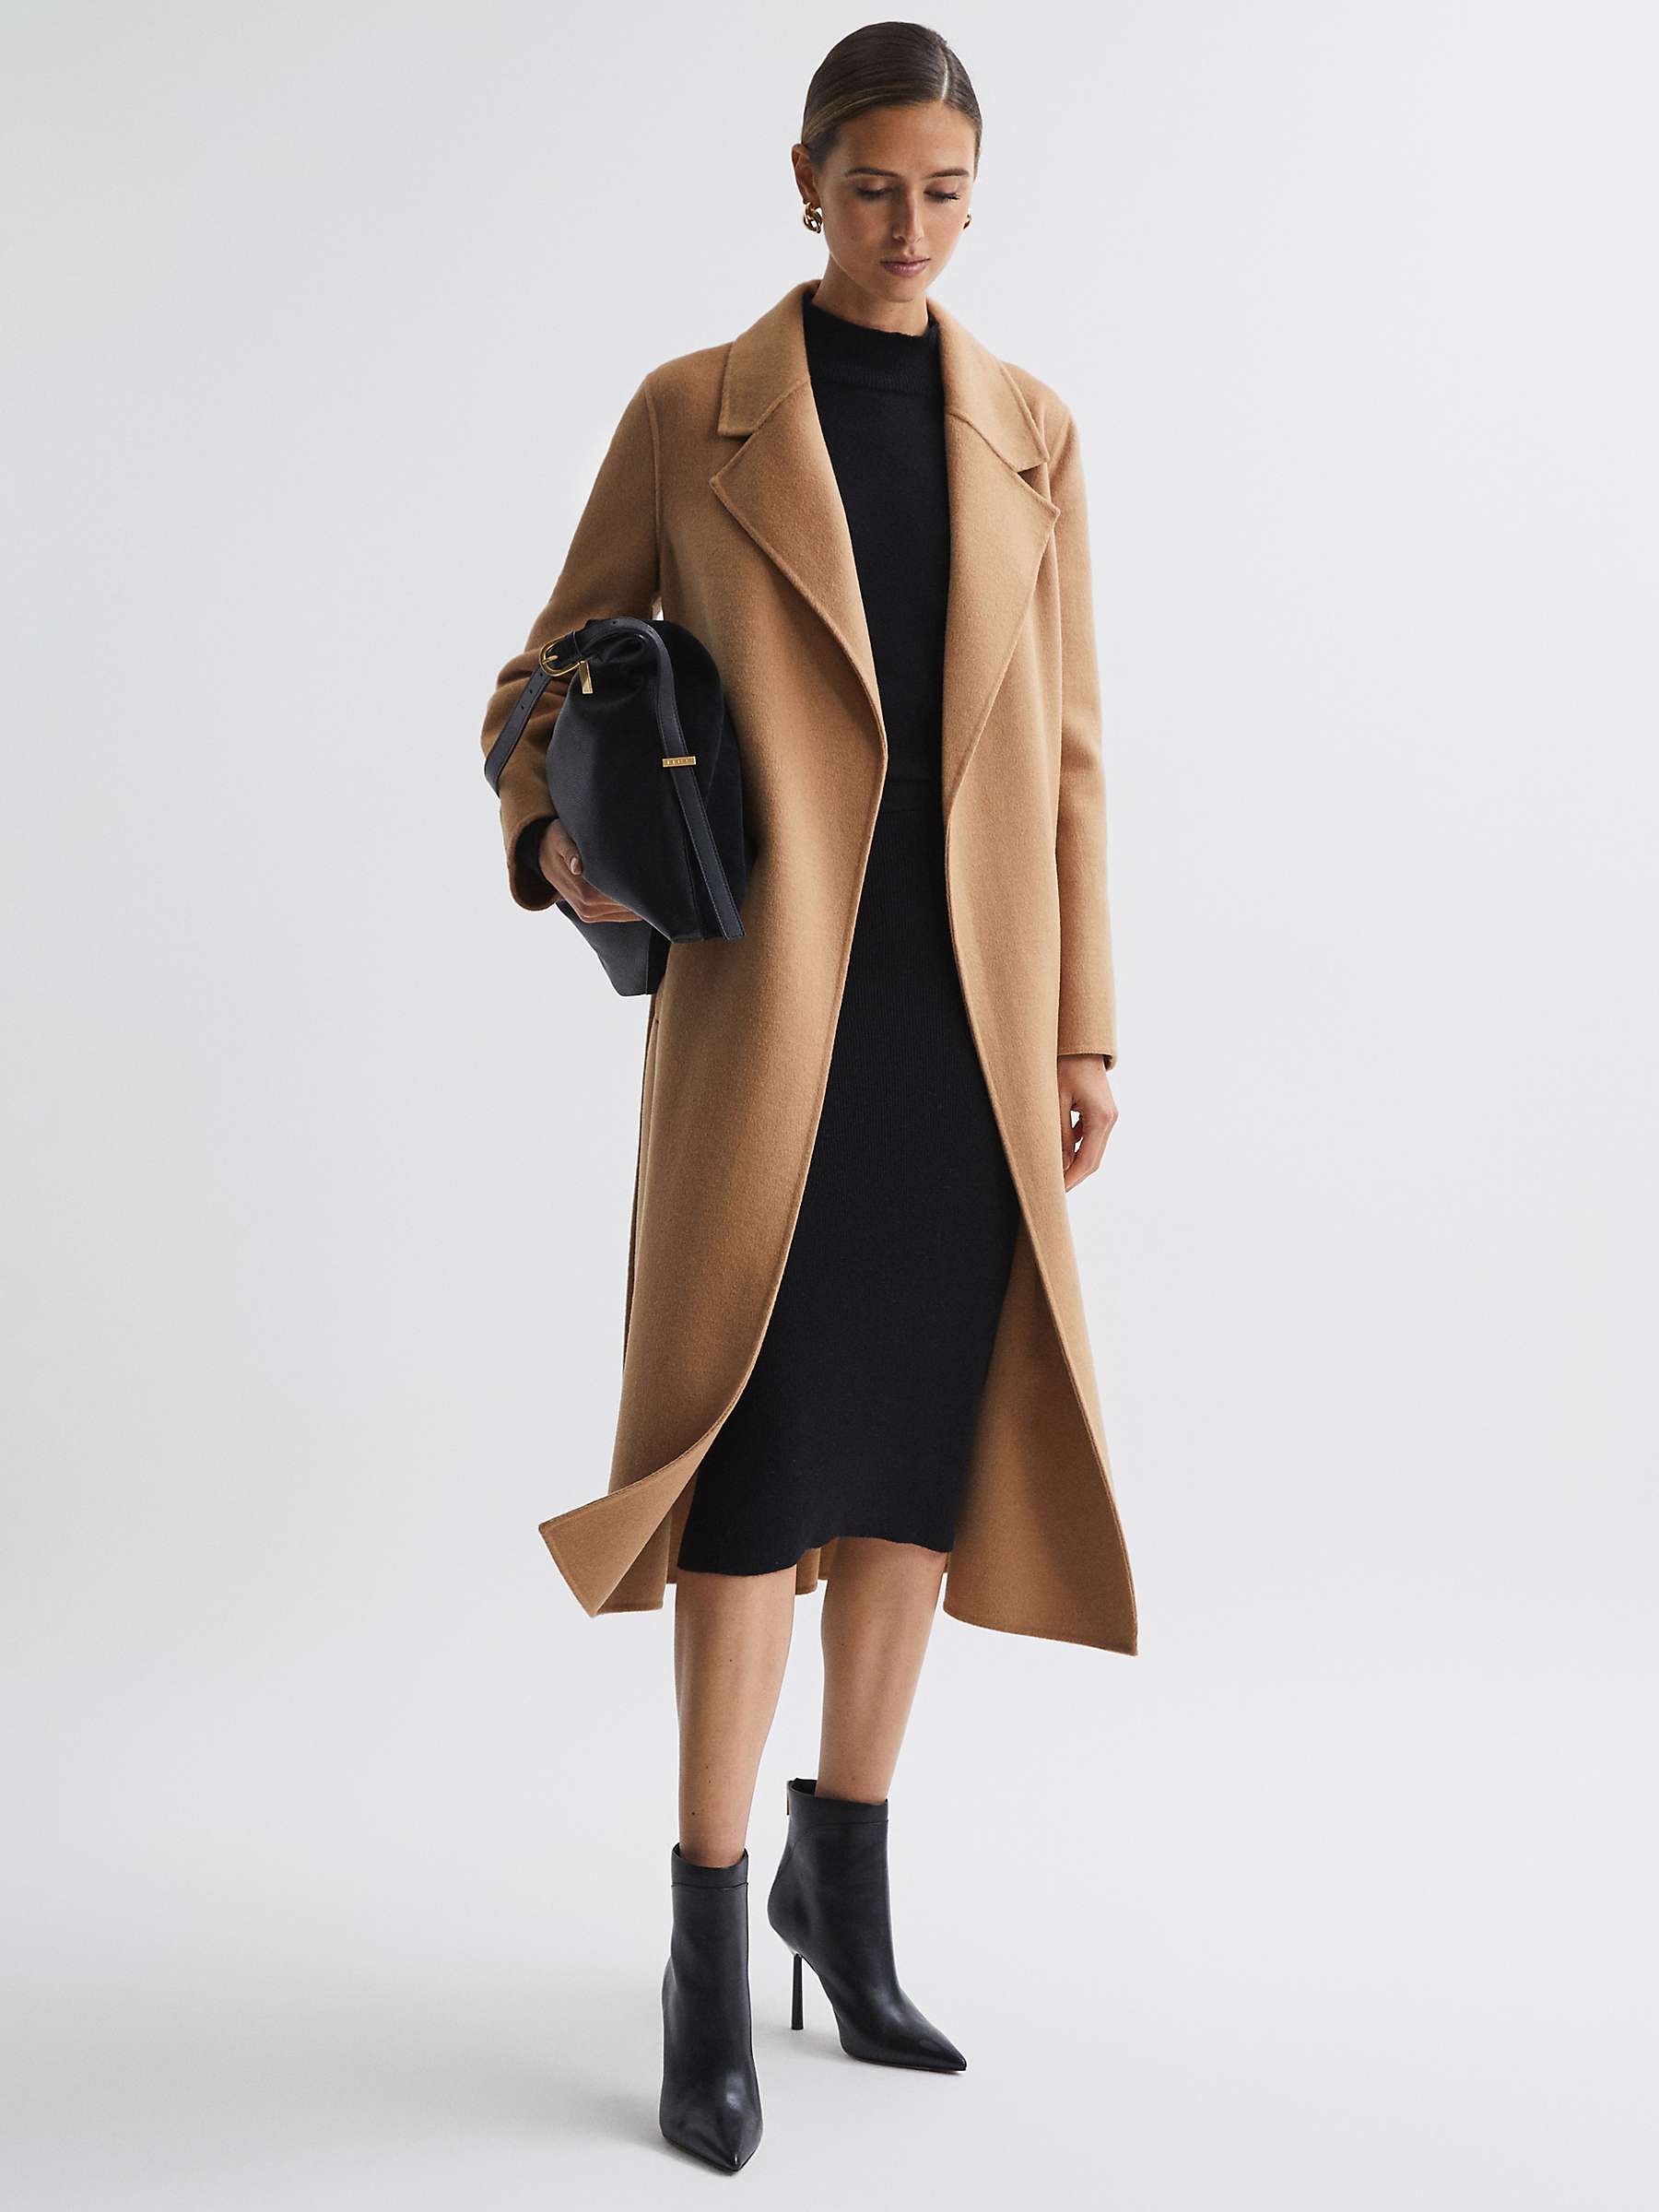 Buy Reiss Petite Emile Long Belted Trench Coat, Camel Online at johnlewis.com